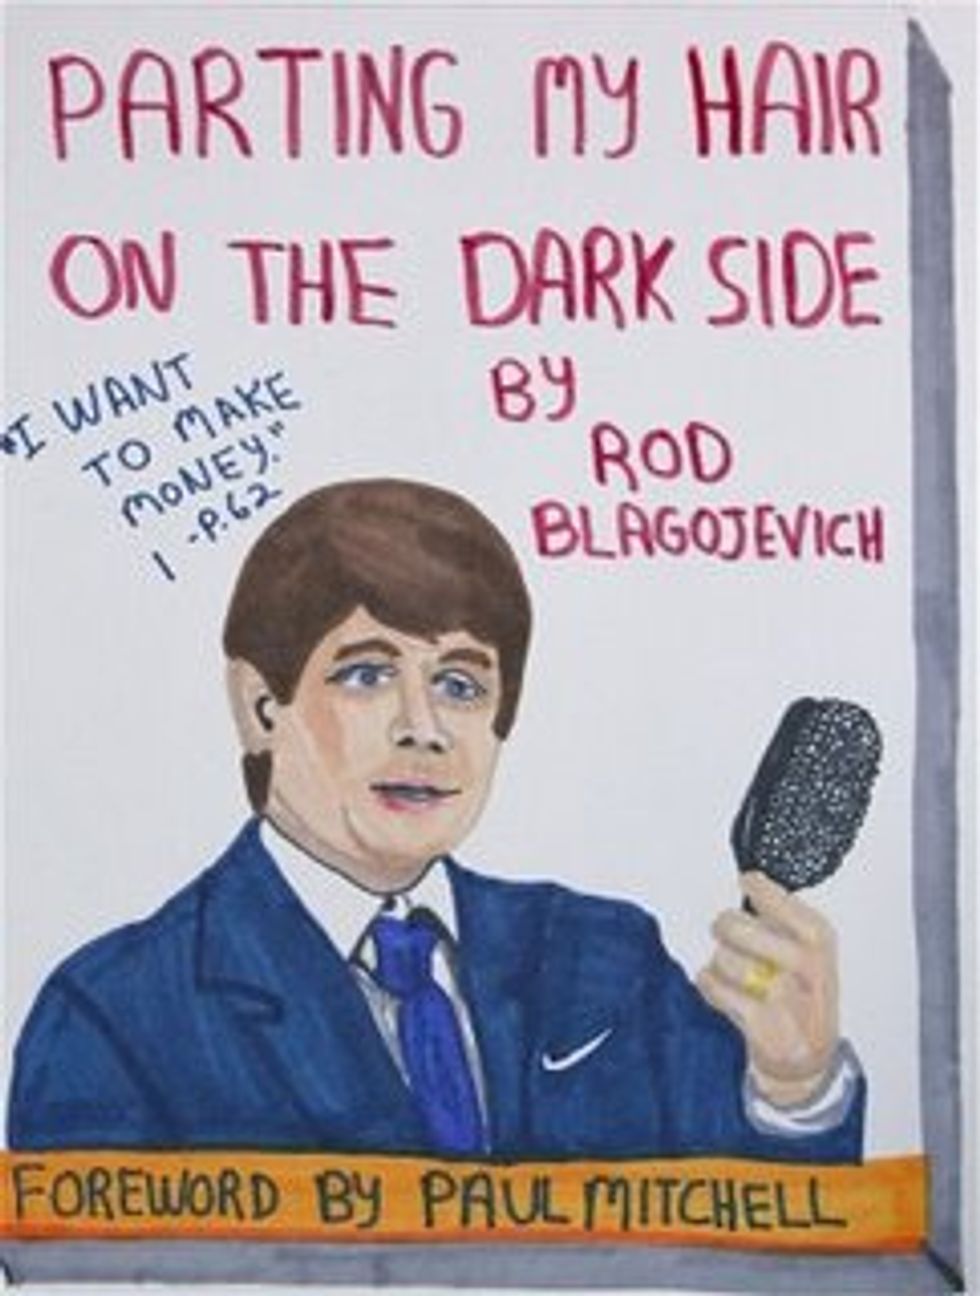 Blago's Book Sure To Be Bestseller